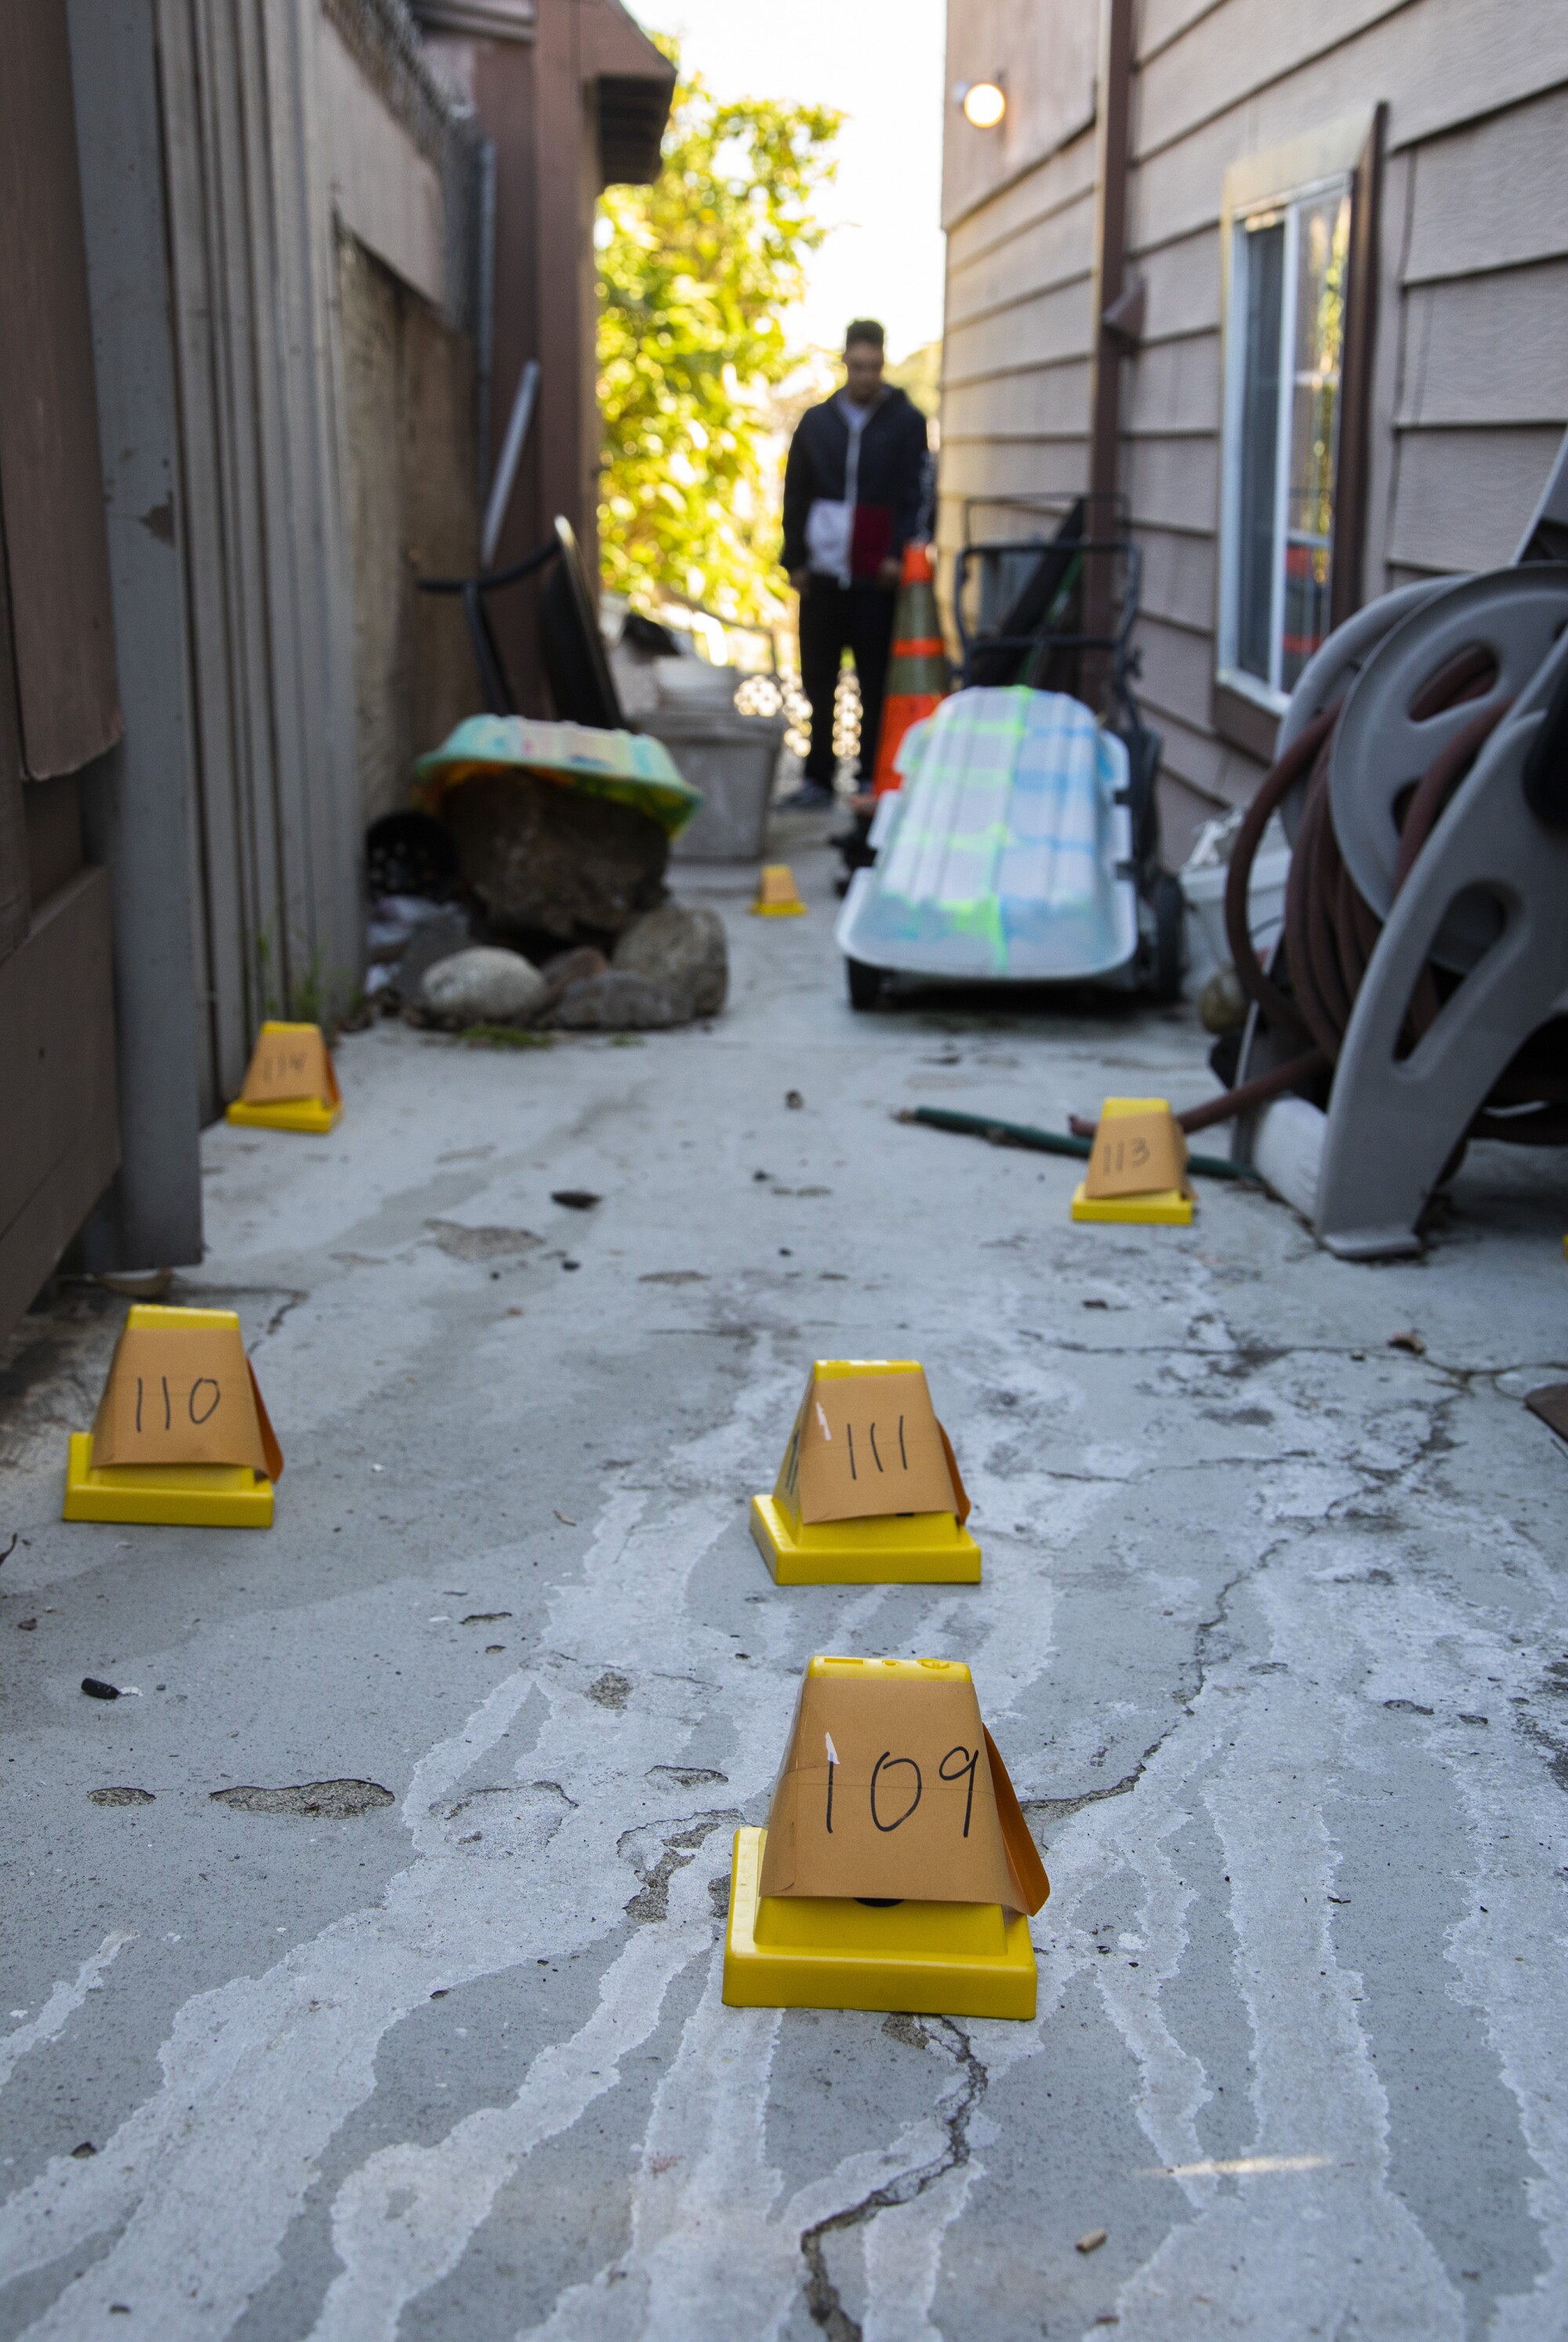 Yellow pylons are used as evidence markers near a home